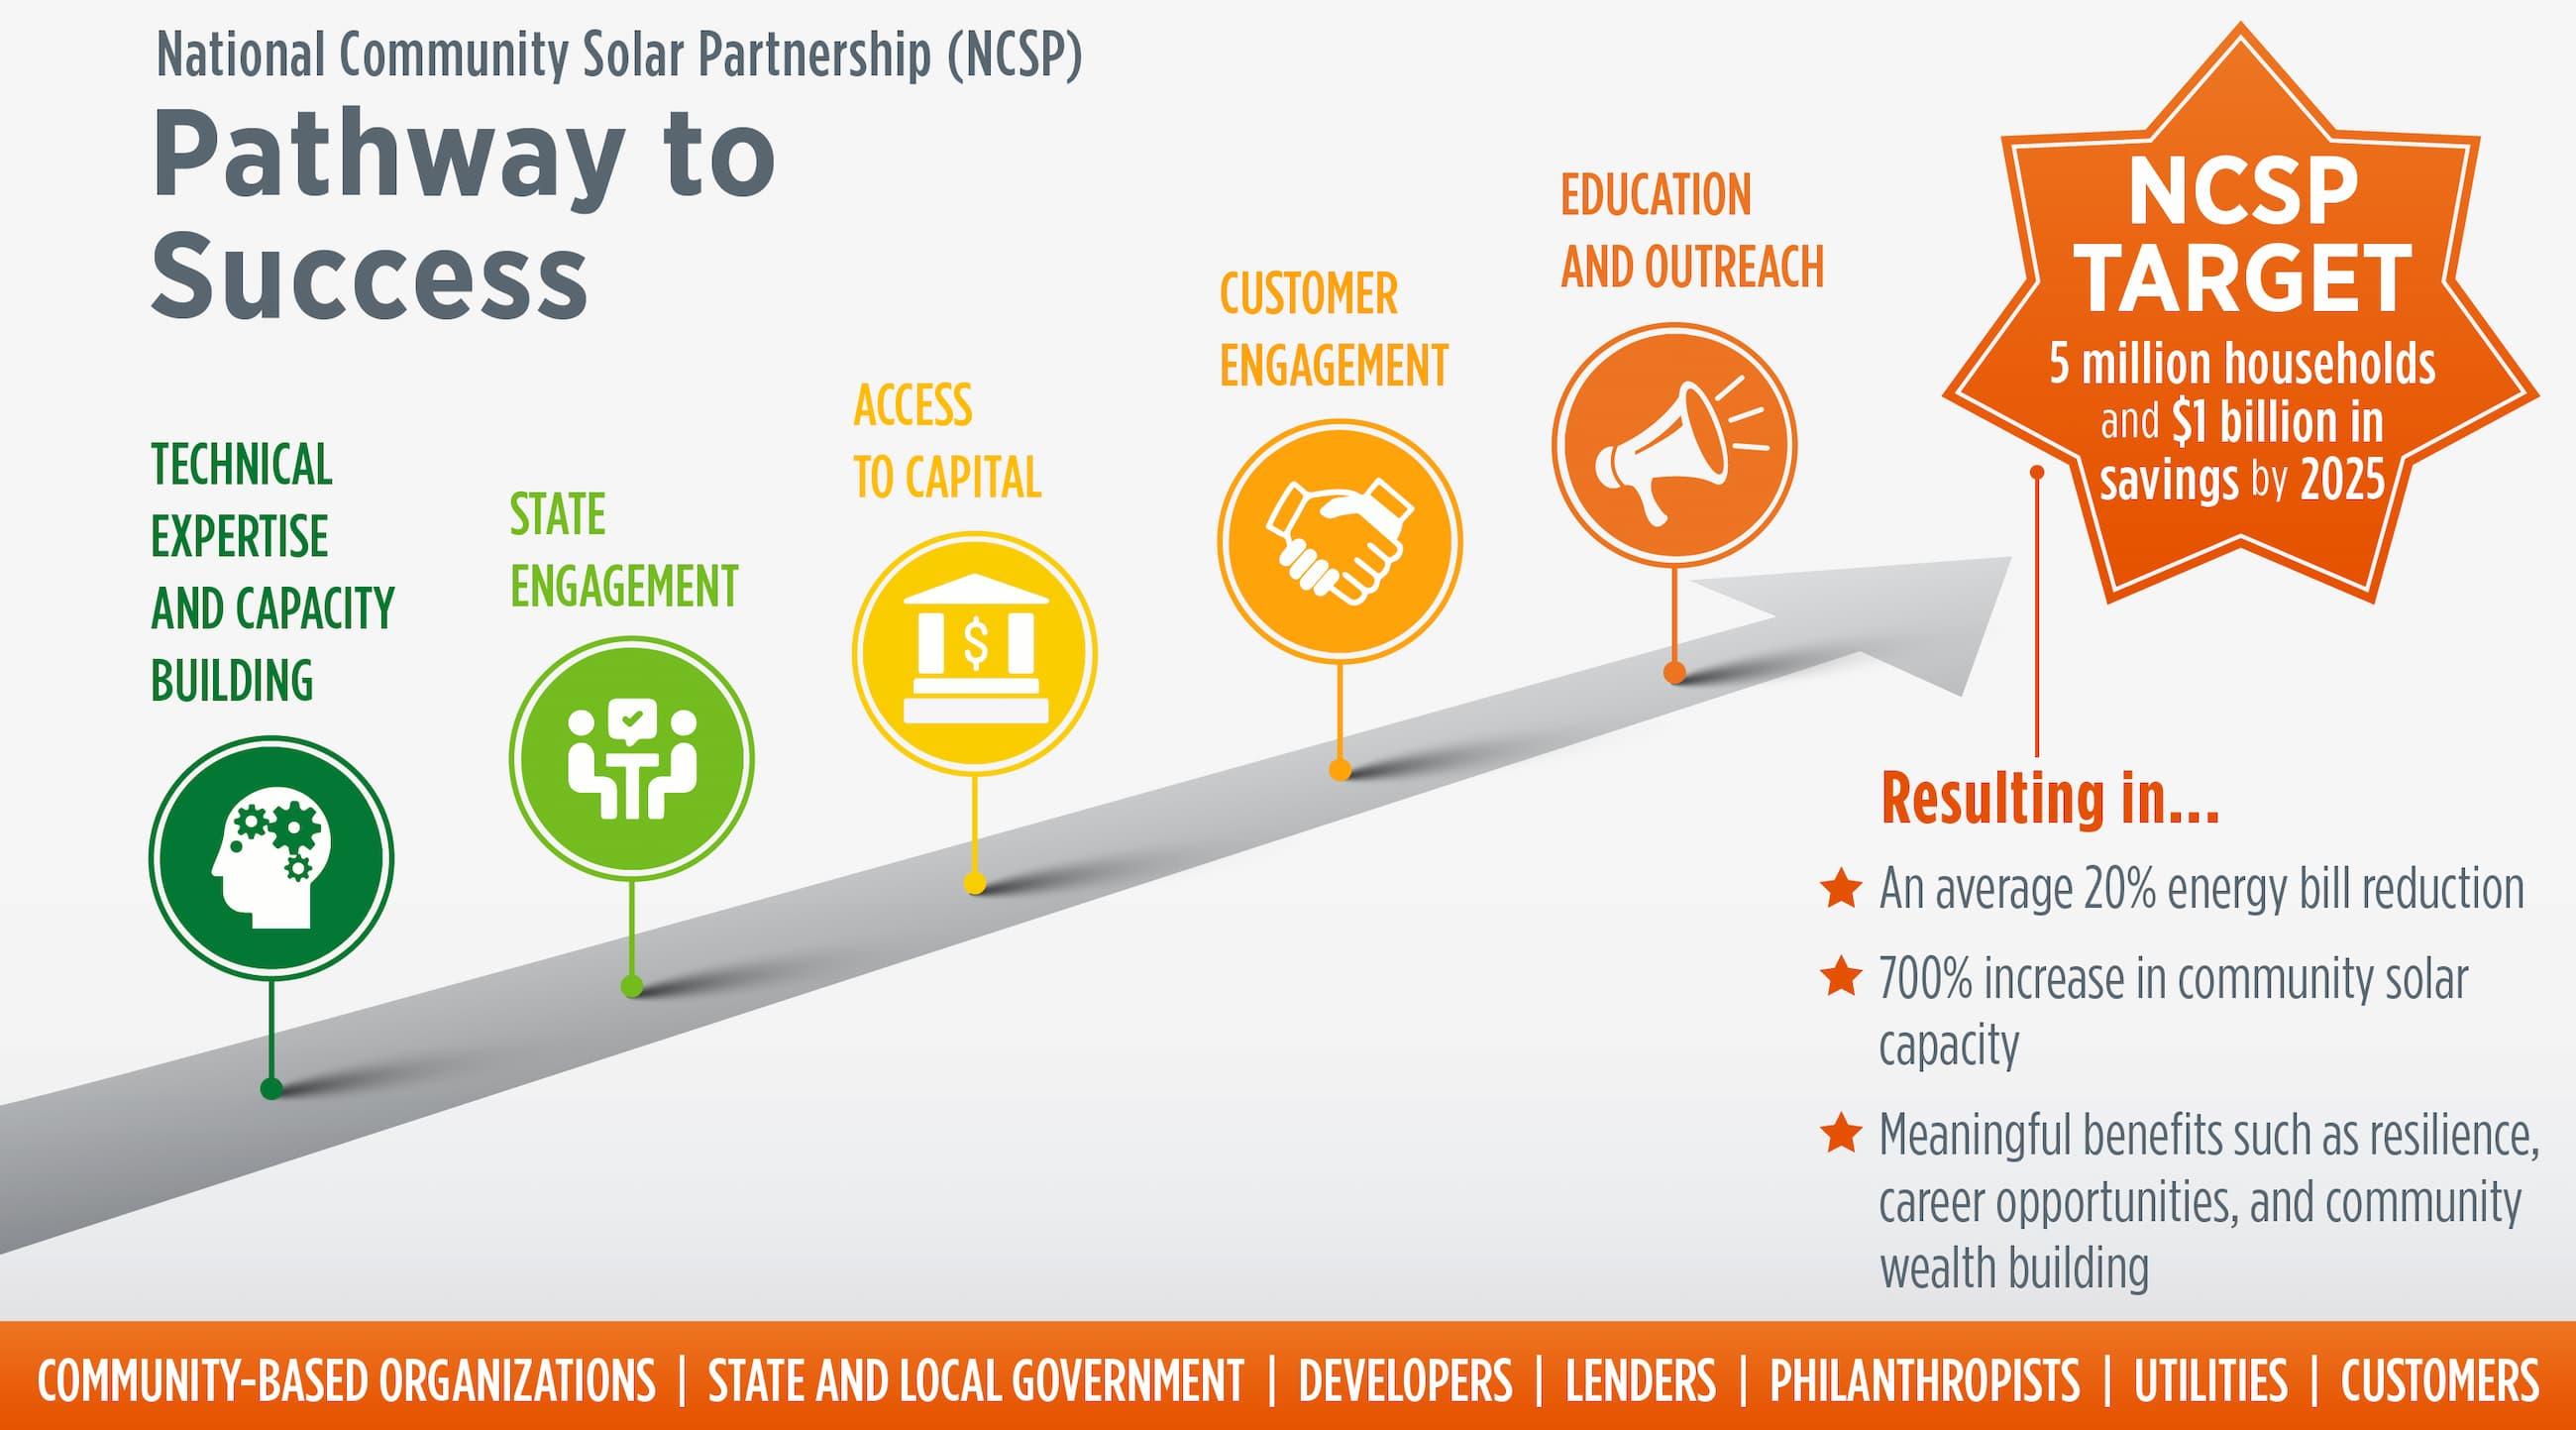 Graphic illustrating what the National Community Partnership represents. Pathway to Success: technical expertise and capacity building, state engagement, access to capital, customer engagement, hearts and minds - resulting in: 5 million households and $1 billion in savings, an average 20% energy bill reduction, 700% increase in community solar capacity, and meaningful benefits such as resilience, career opportunities, and community wealth buidling.